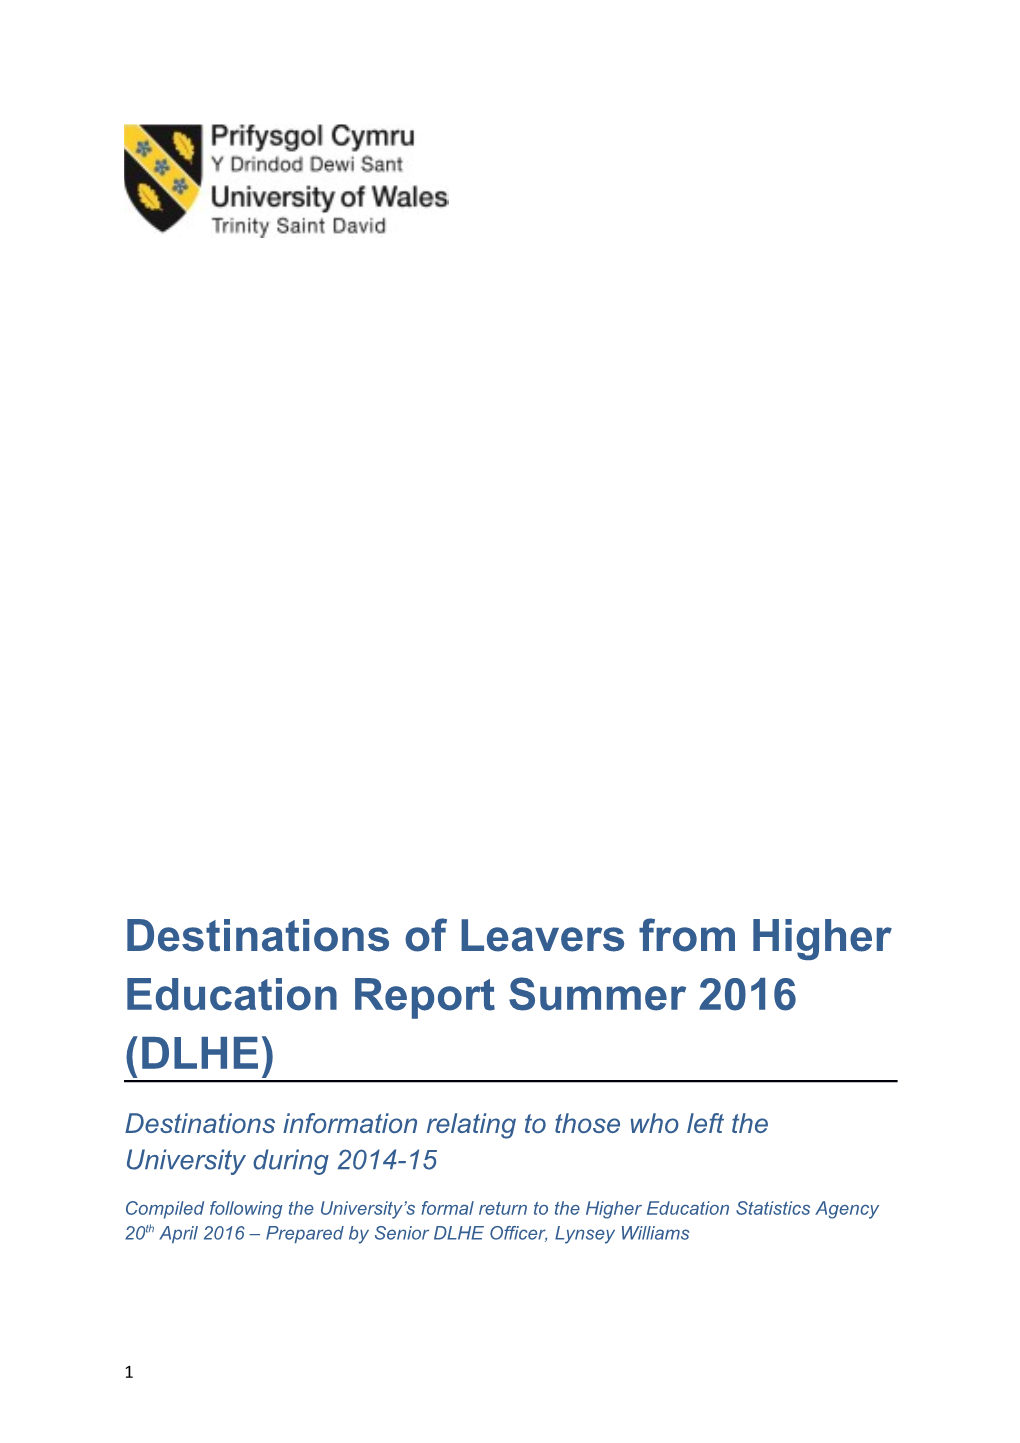 Destinations of Leavers from Higher Education Report Summer 2016 (DLHE)